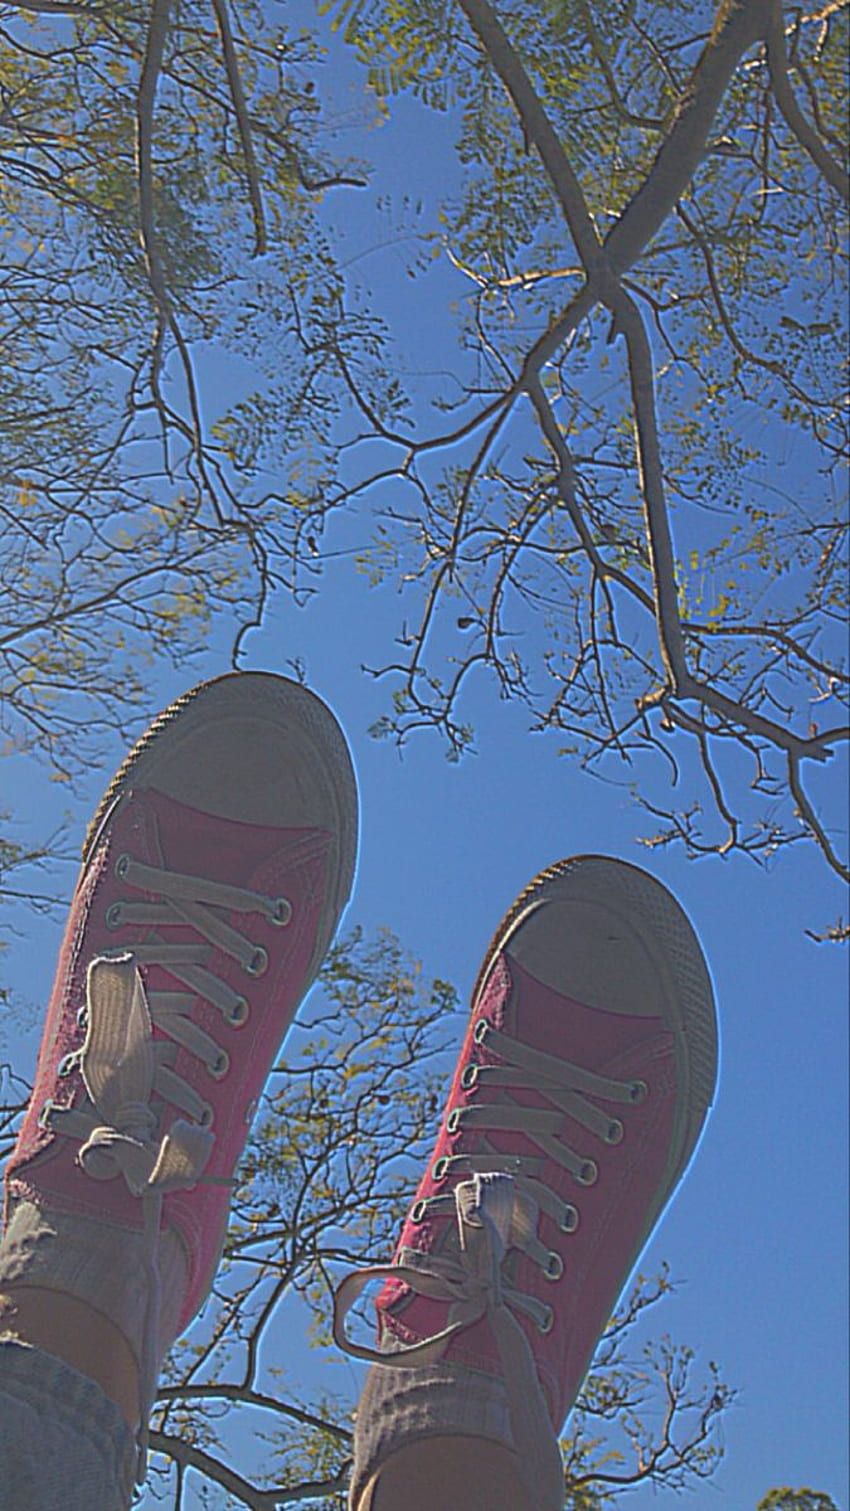 A pair of pink shoes with white shoe strings - Shoes